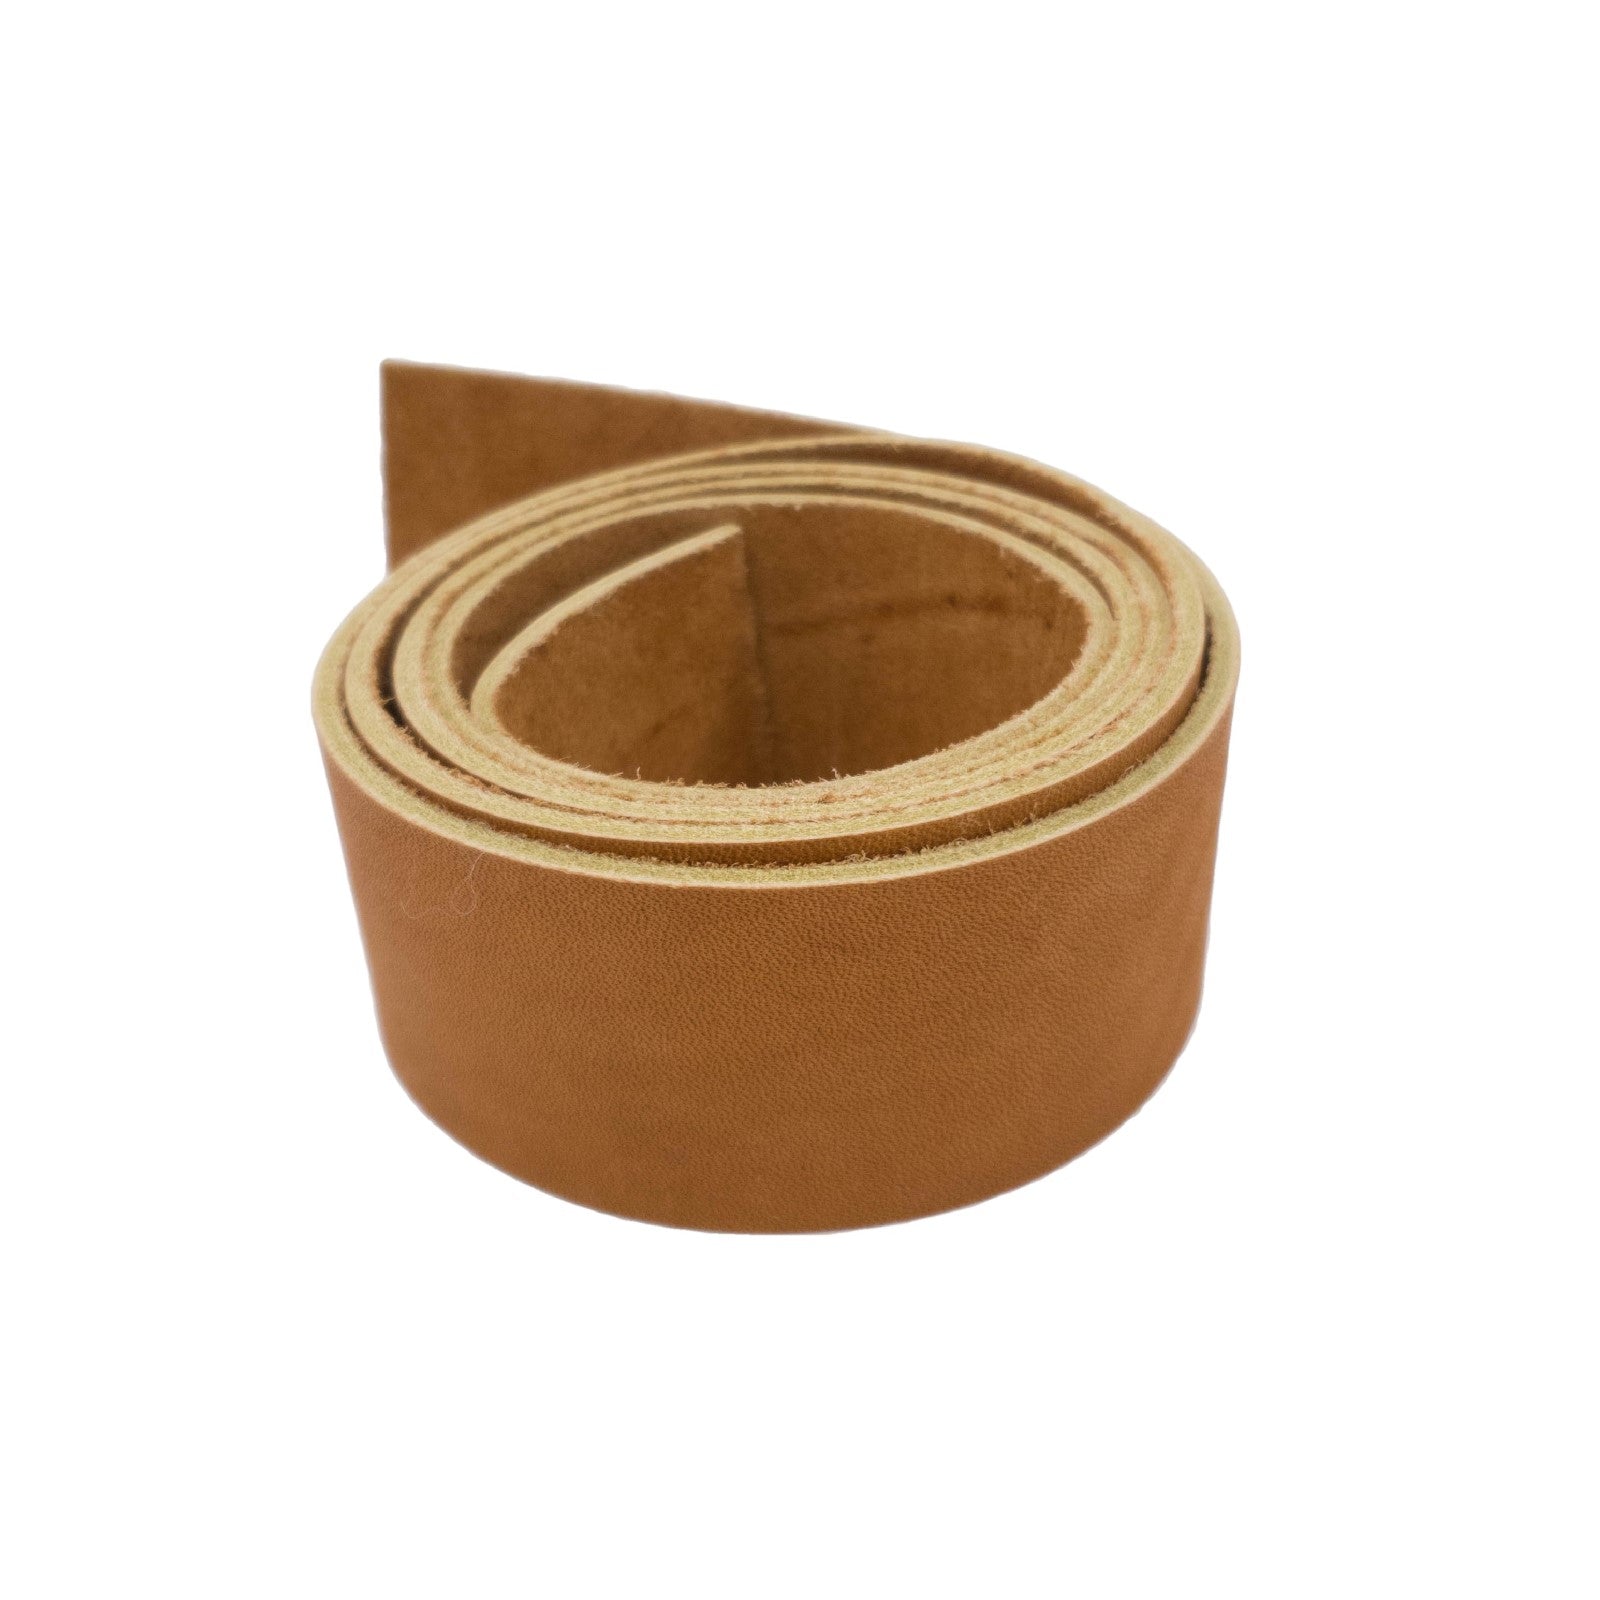 Oil Tanned Strap Seconds, 6-7 oz, Pre-cut Belt Blanks, Light Brown / 1 / 48" | The Leather Guy